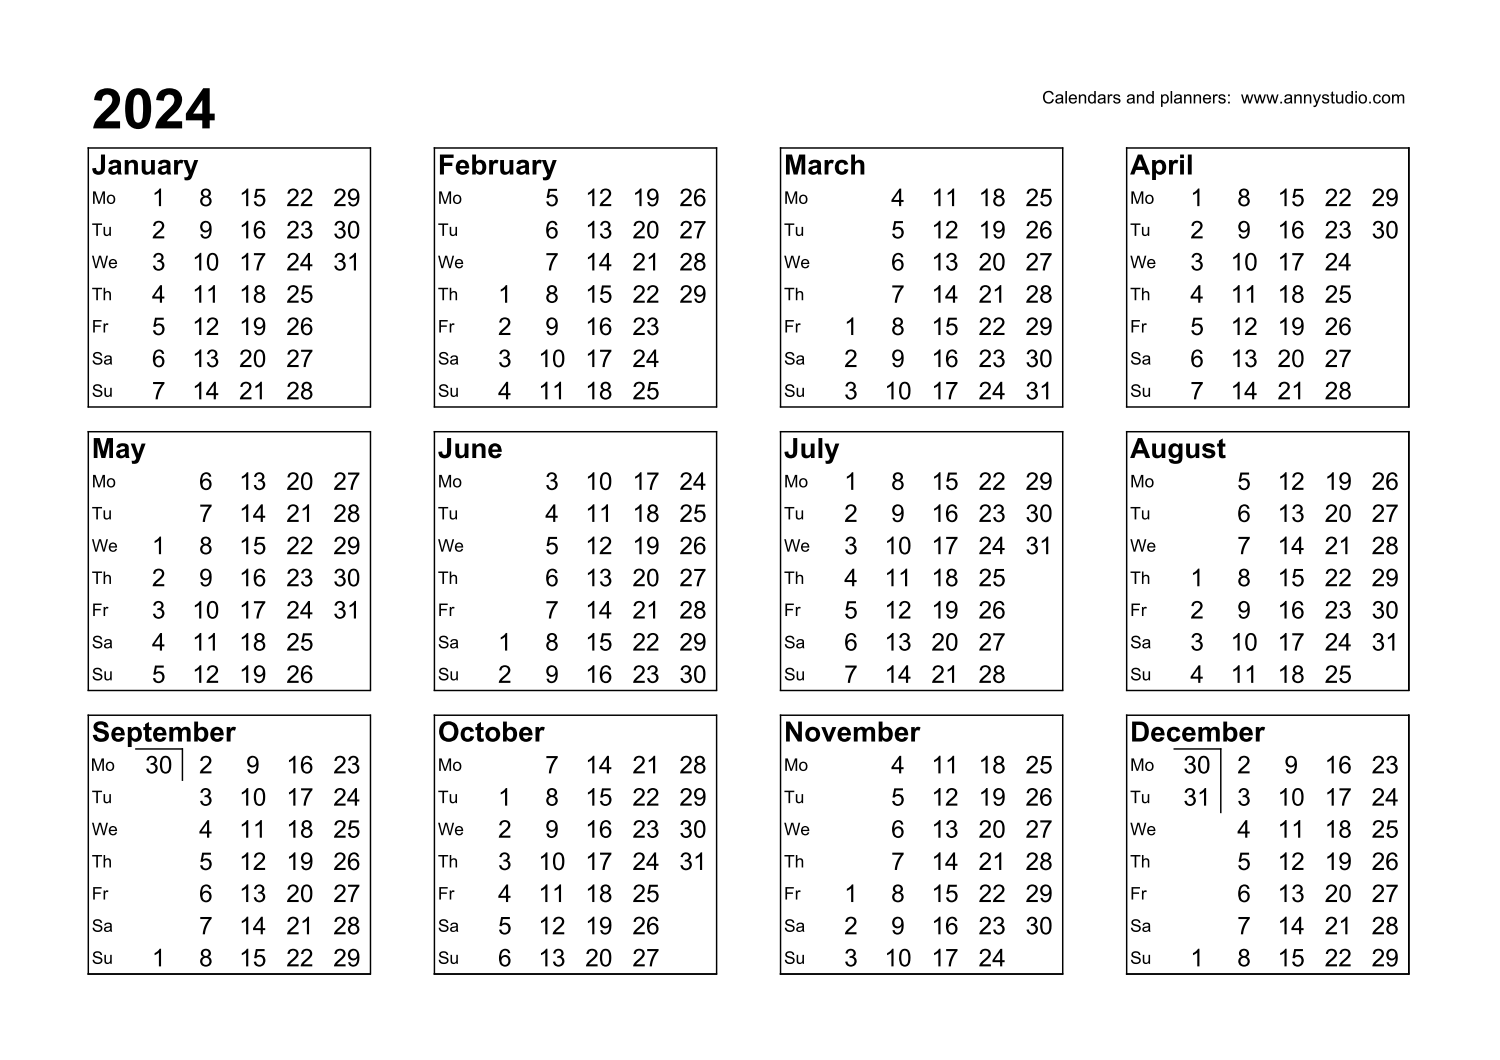 Free Printable Calendars And Planners 2024, 2025 And 2026 for Printable Calendar 2024 With Week Numbers